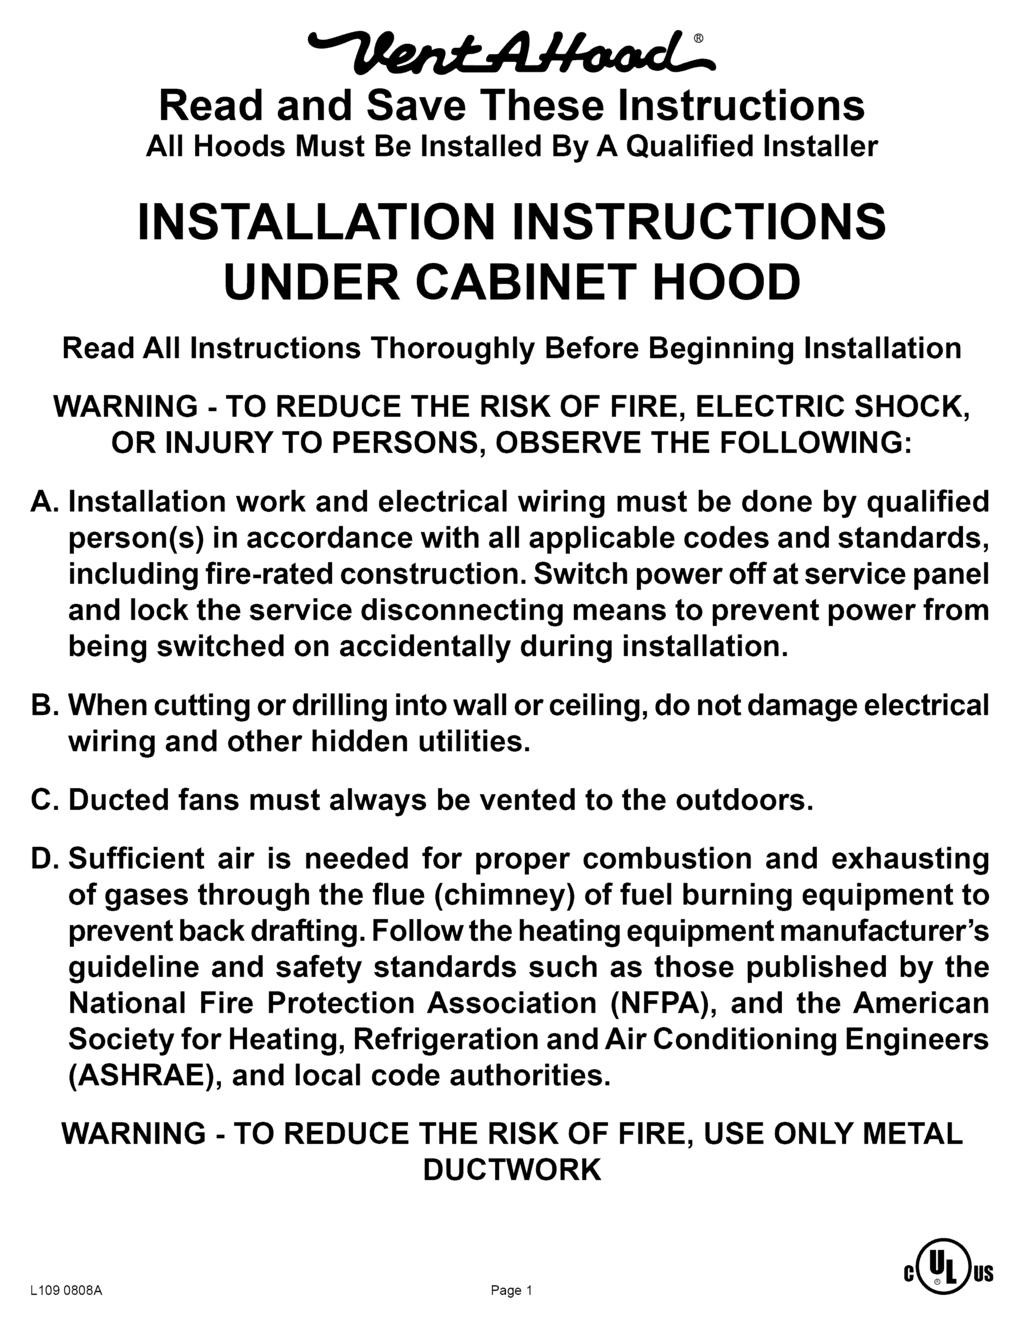 Read and Save These Instructions All Hoods Must Be Installed By A Qualified Installer INSTALLATION INSTRUCTIONS UNDER CABINET HOOD Read All Instructions Thoroughly Before Beginning Installation